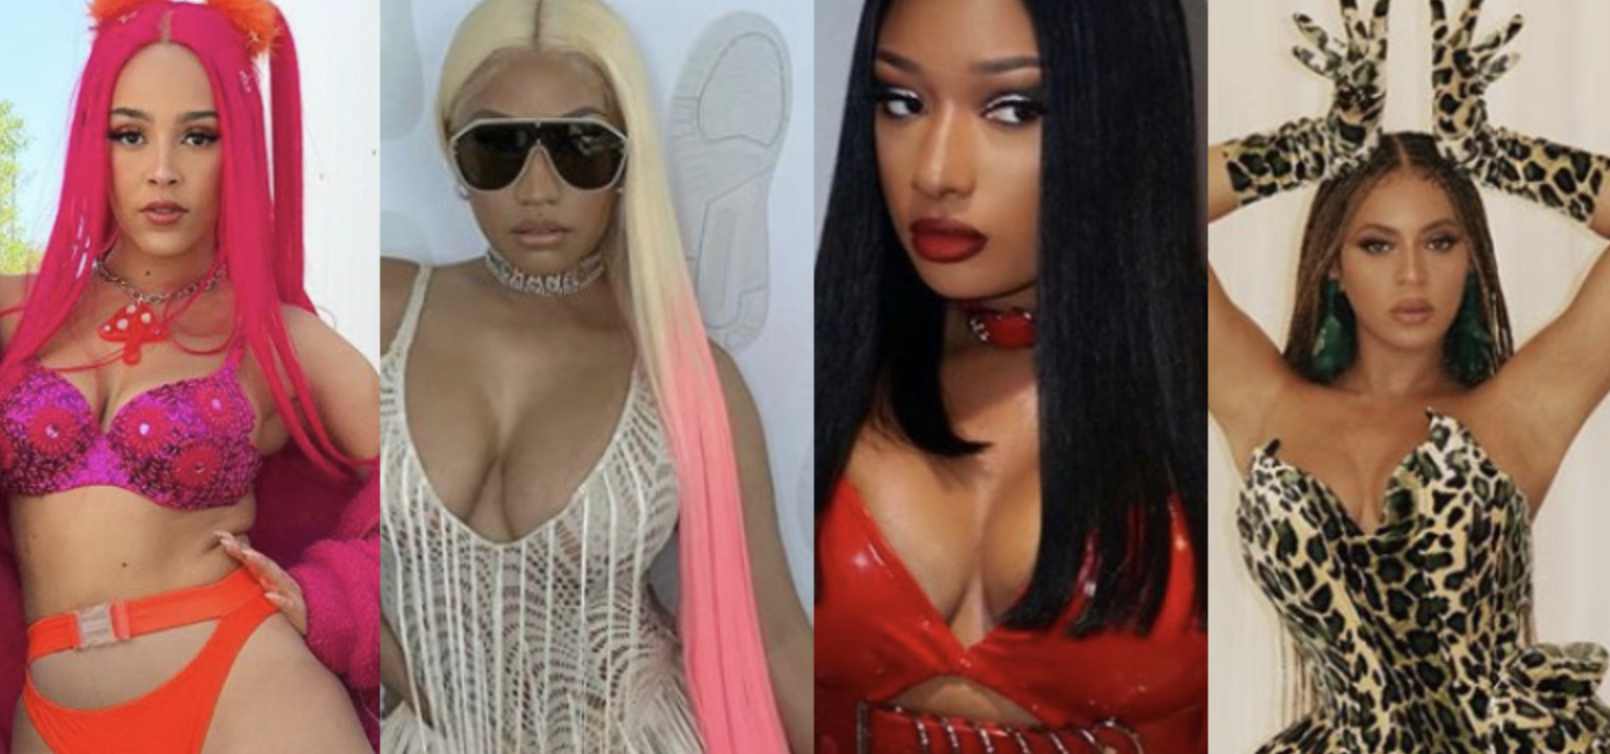 Four Black Women Are Dominating The Top 2 Hot 100 Spots